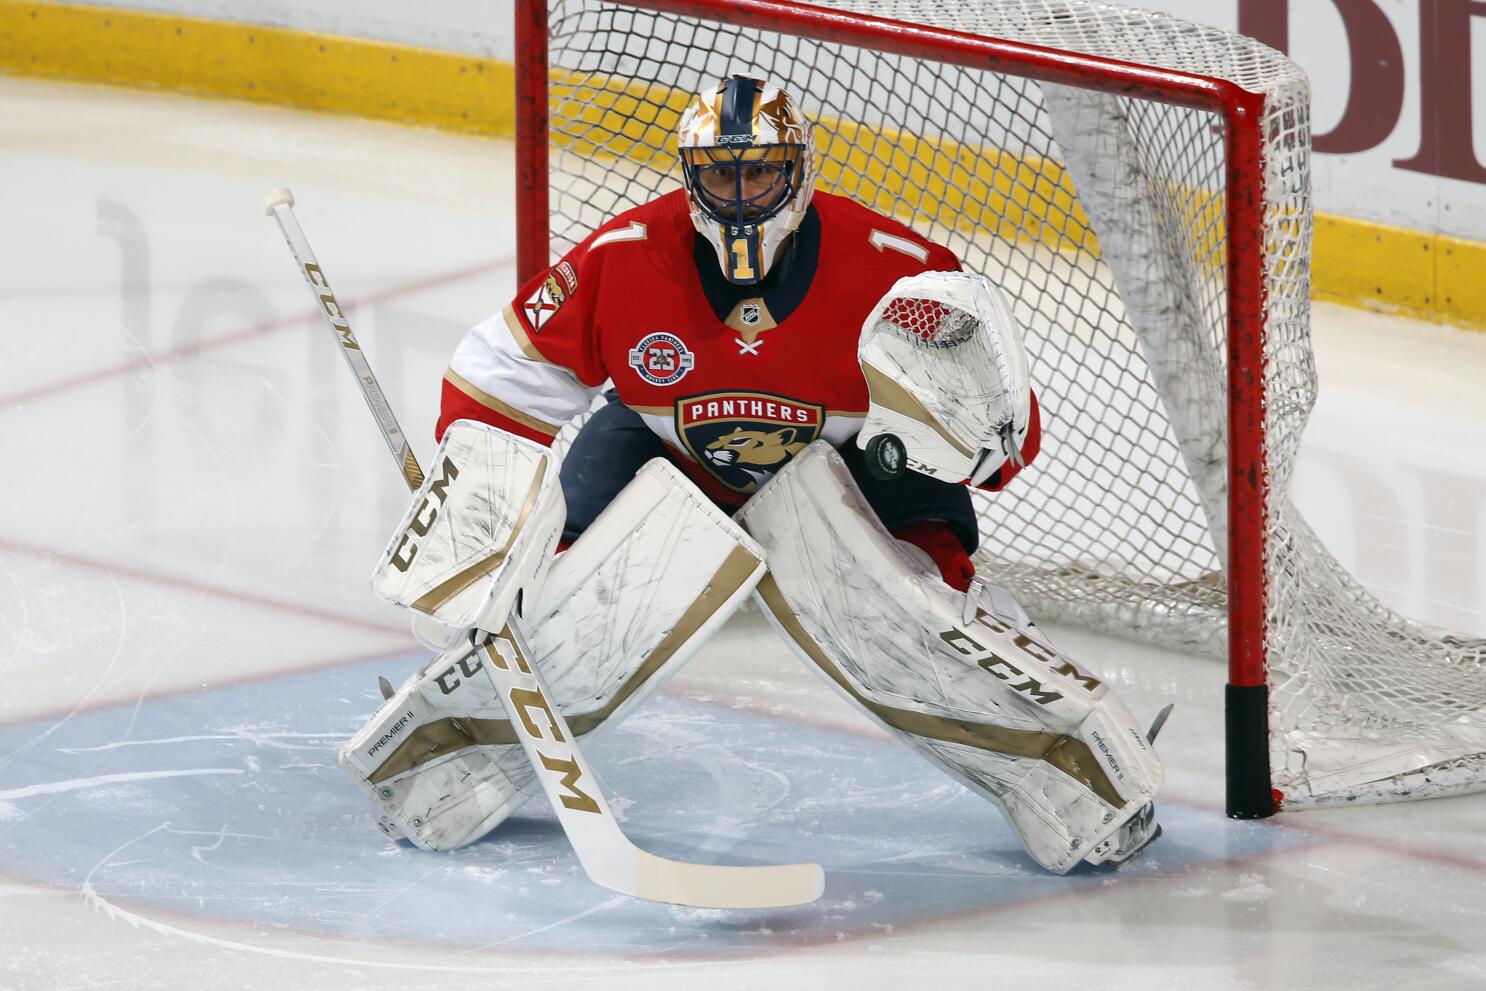 Roberto Luongo's No. 1 jersey goes to the Panthers' rafters